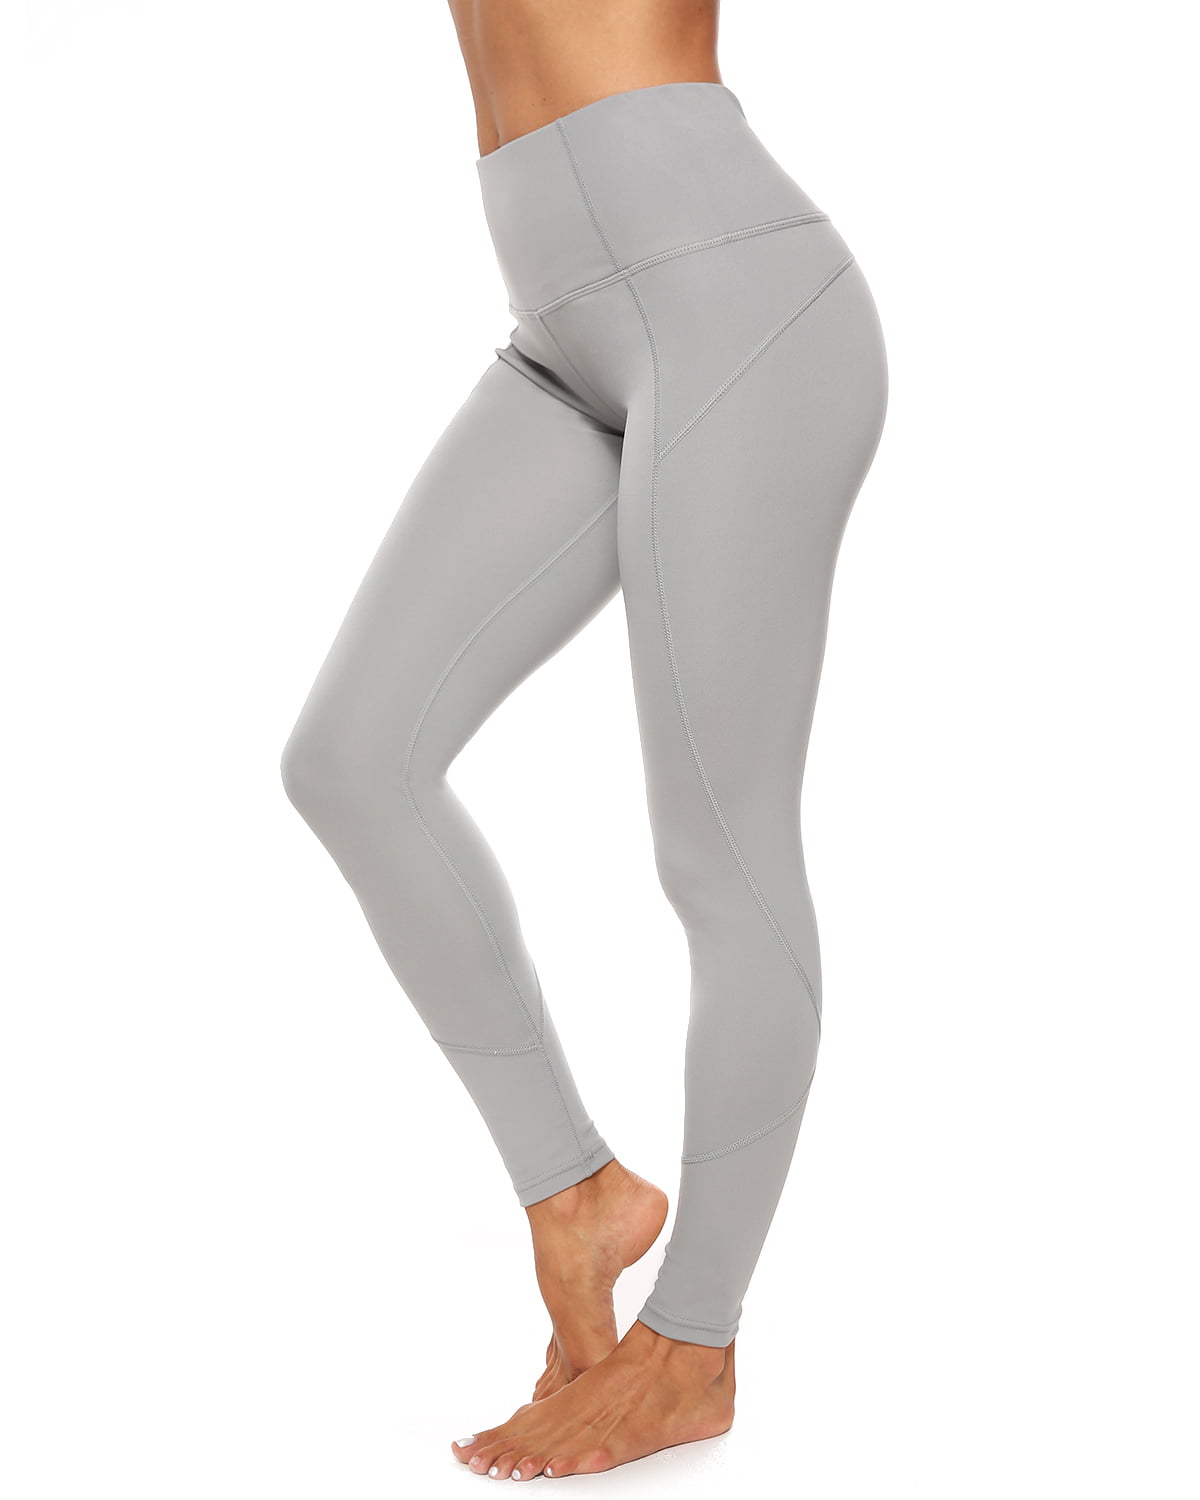 Simple Light Gray Workout Pants for Fat Body